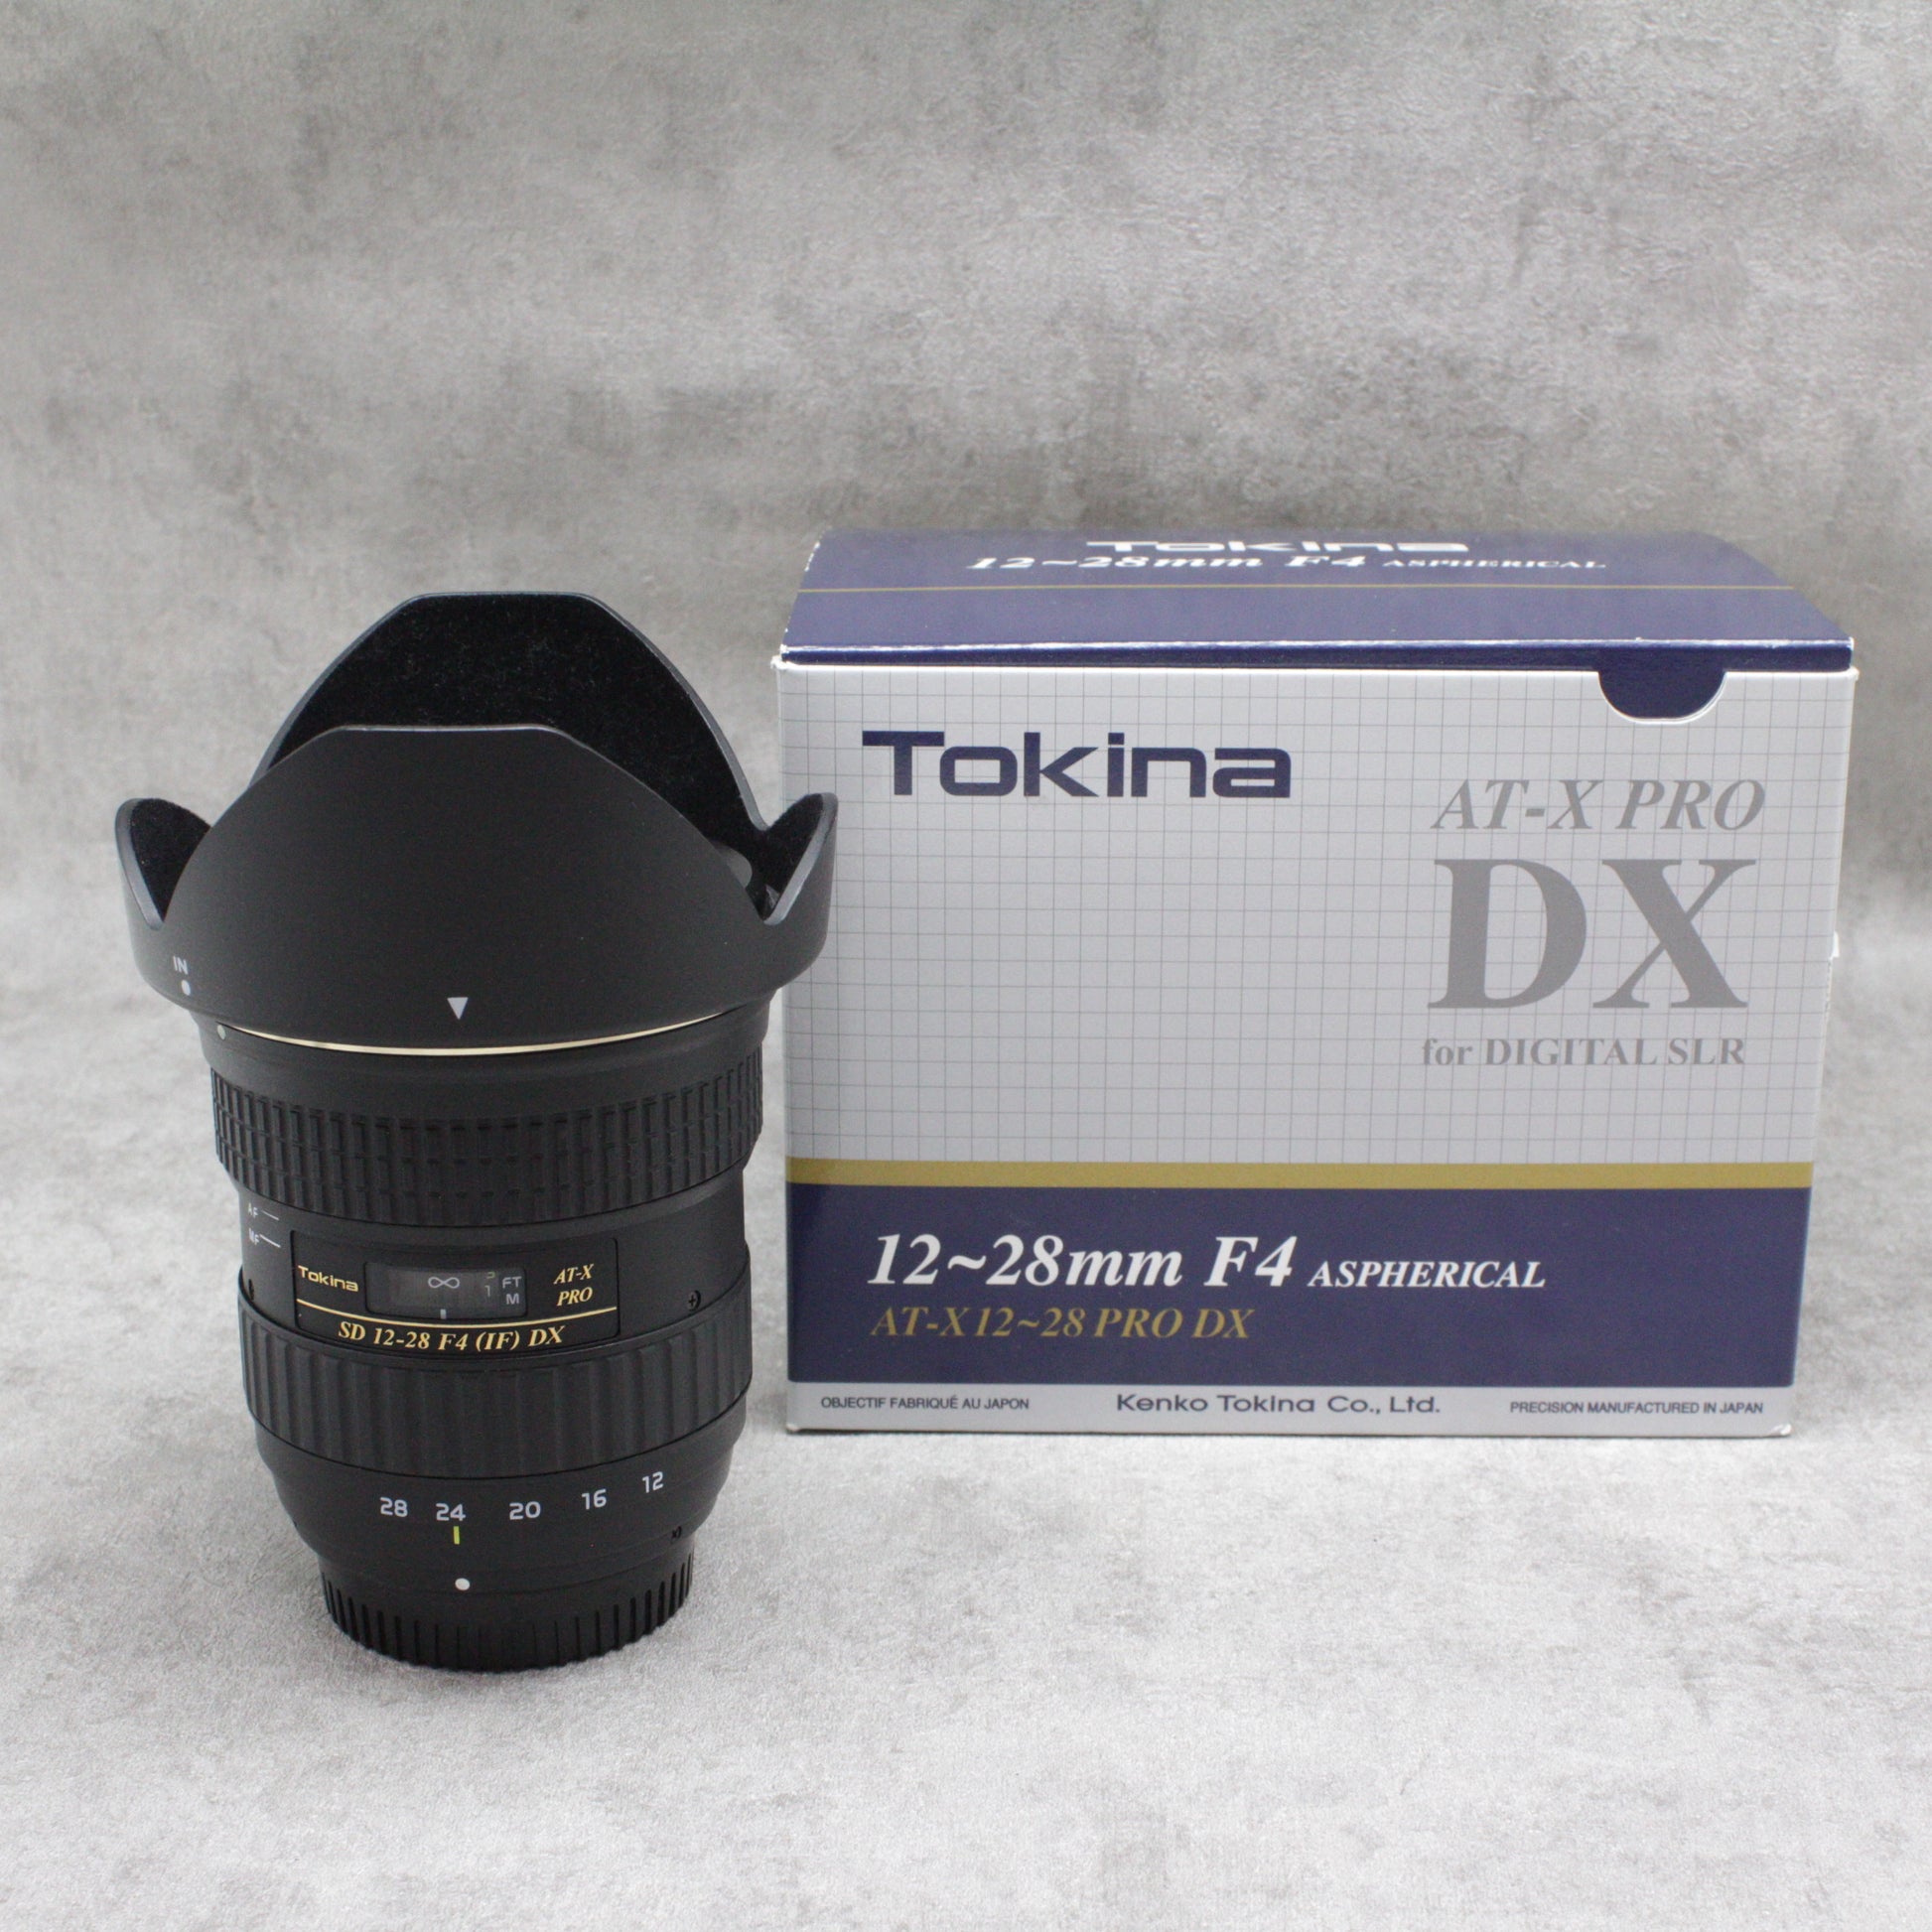 Tokina AT-X 12-28 PRO DX 12-28mm F4 ニコン-